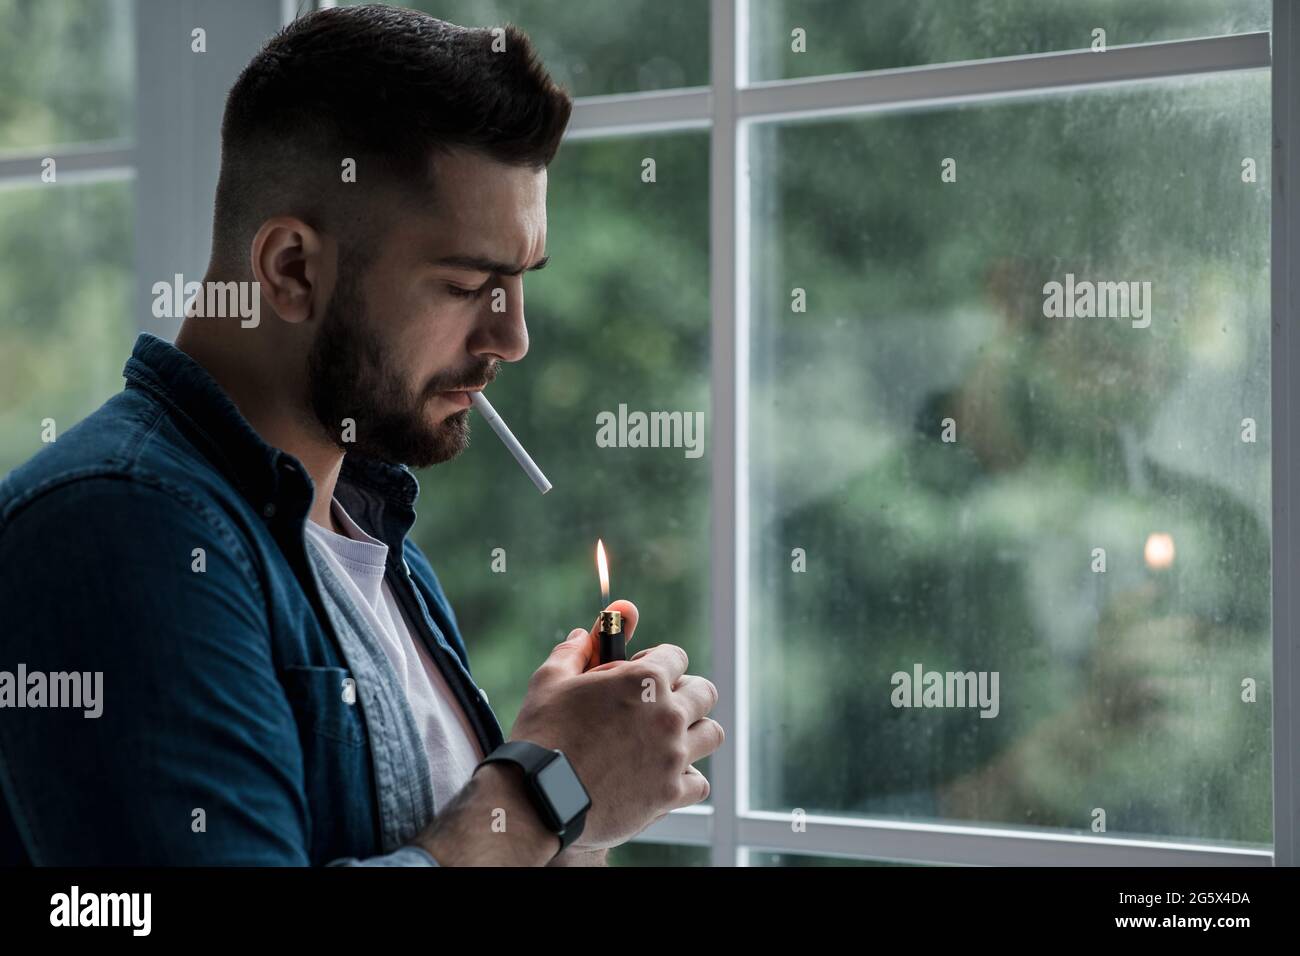 Urban lifestyle, emotional portrait of young handsome man sad and depressed, smoking Stock Photo